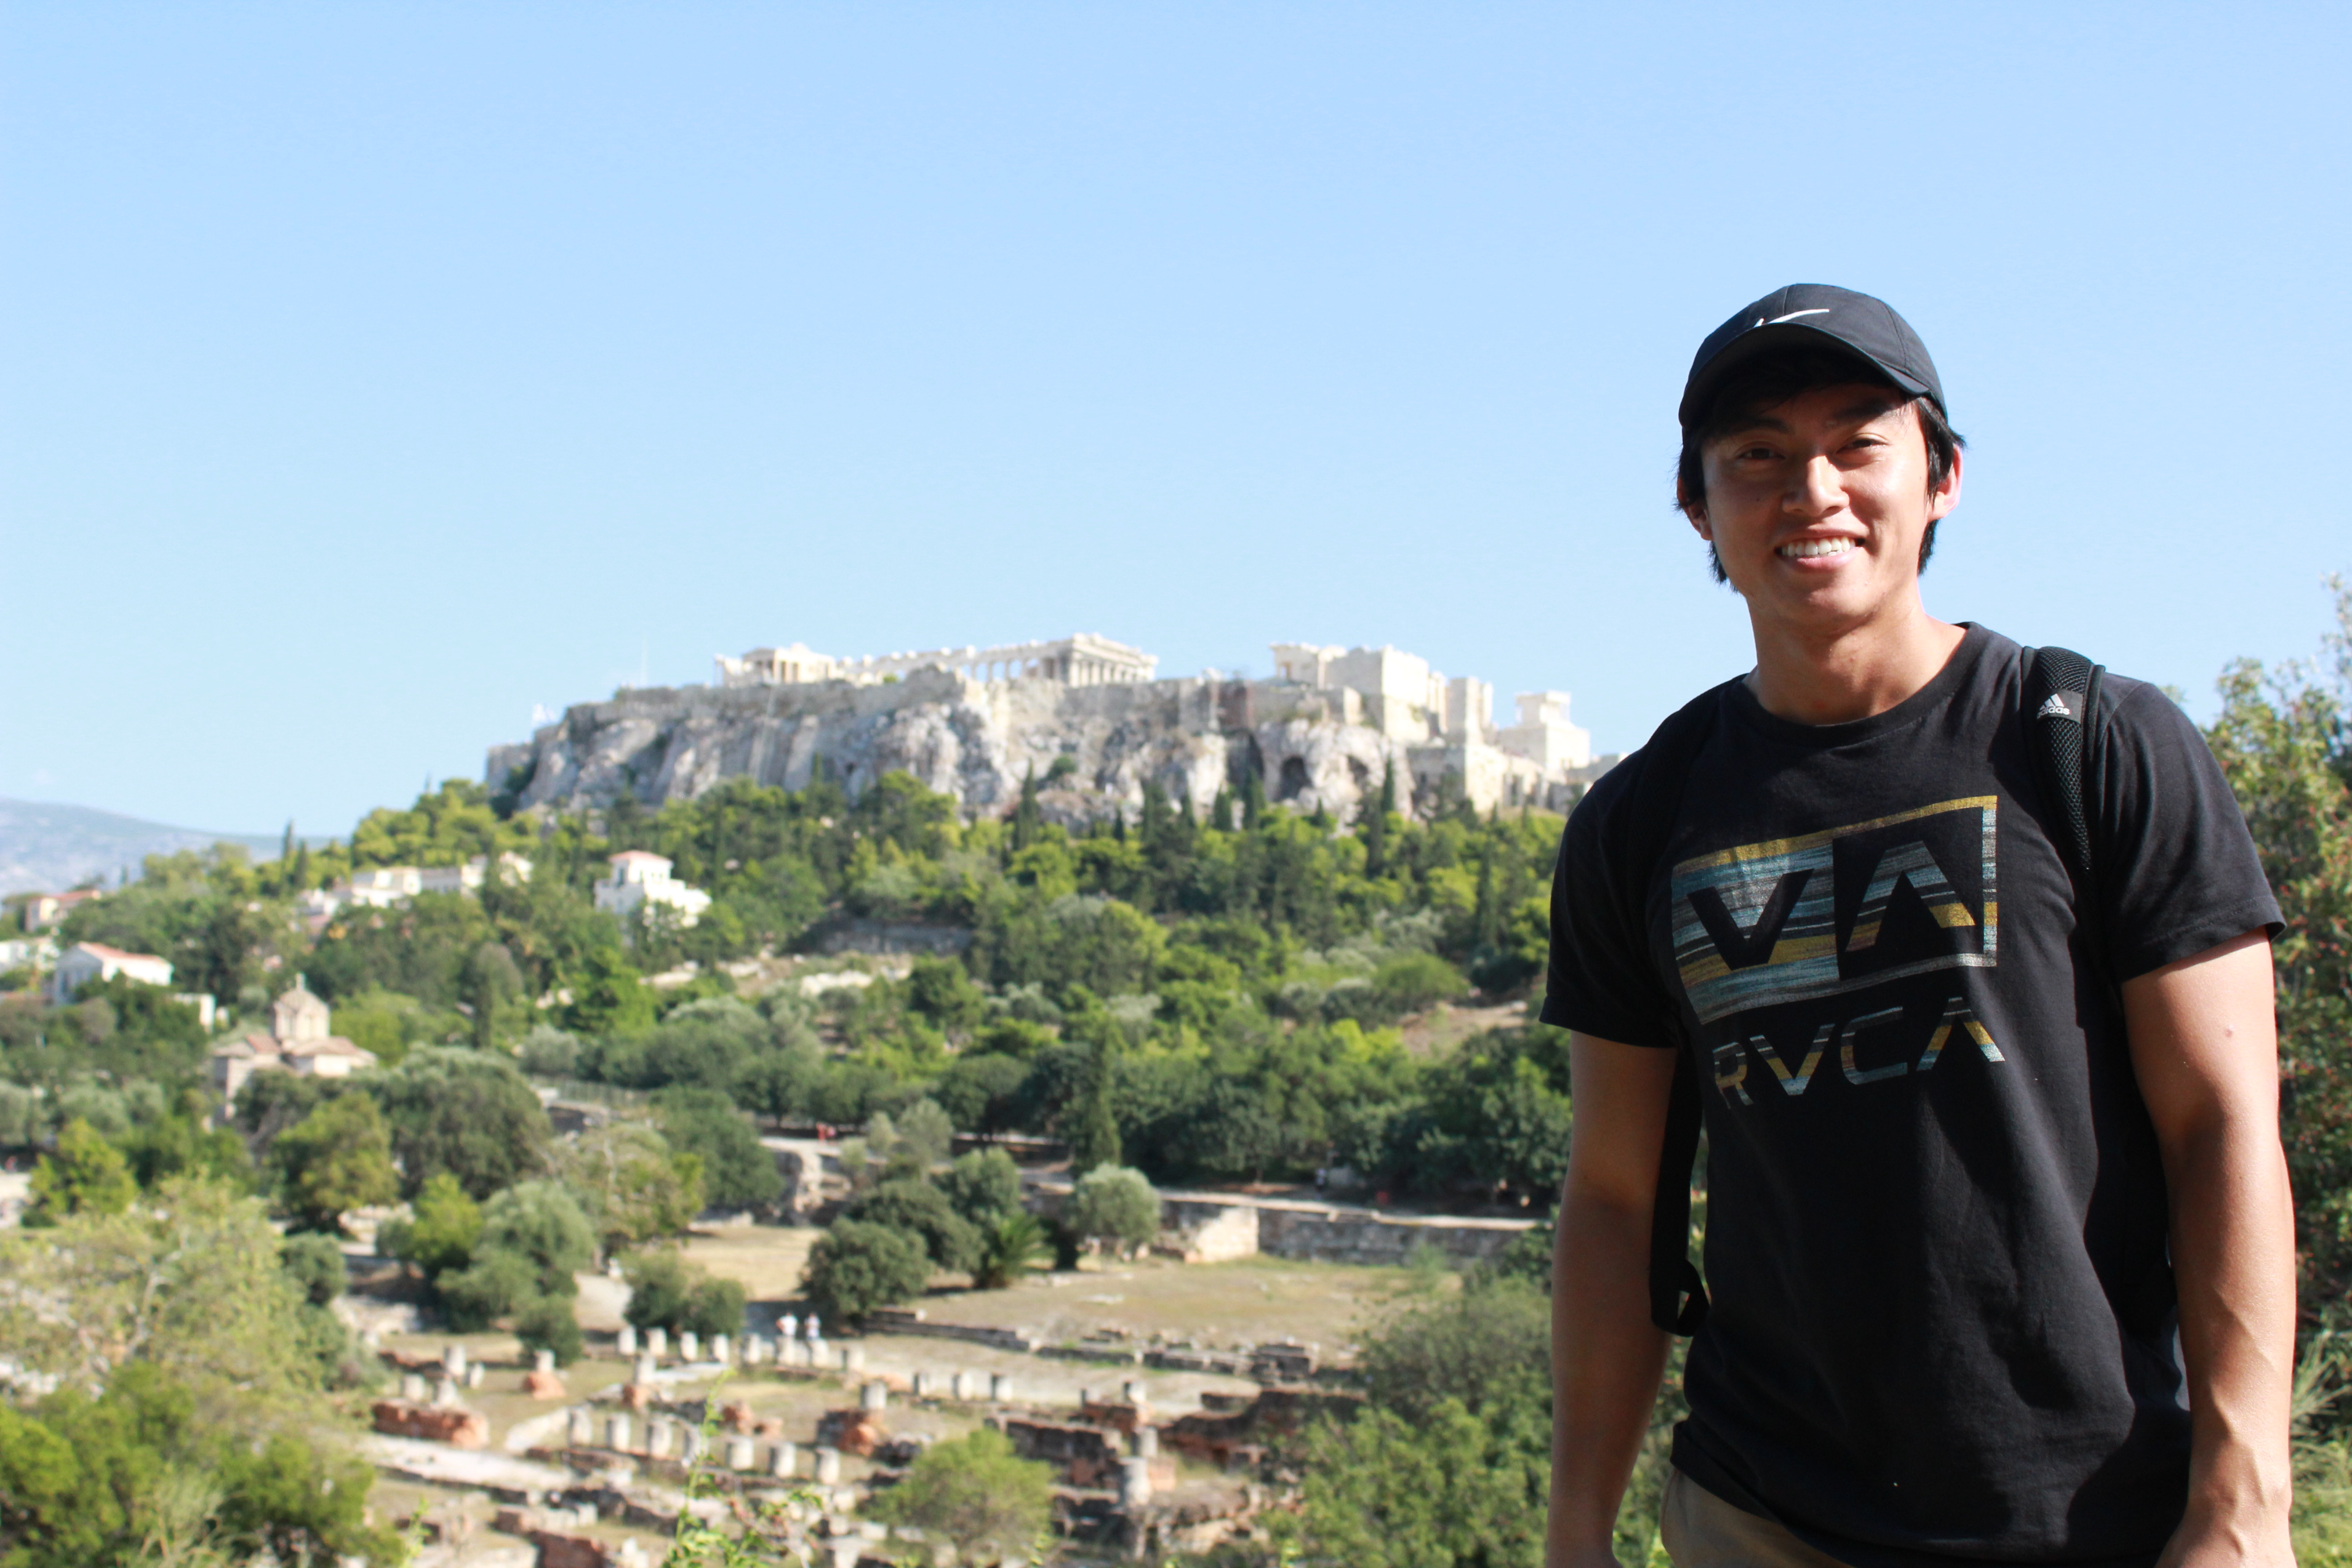 PSU Student standing in front of the Acropolis in Greece